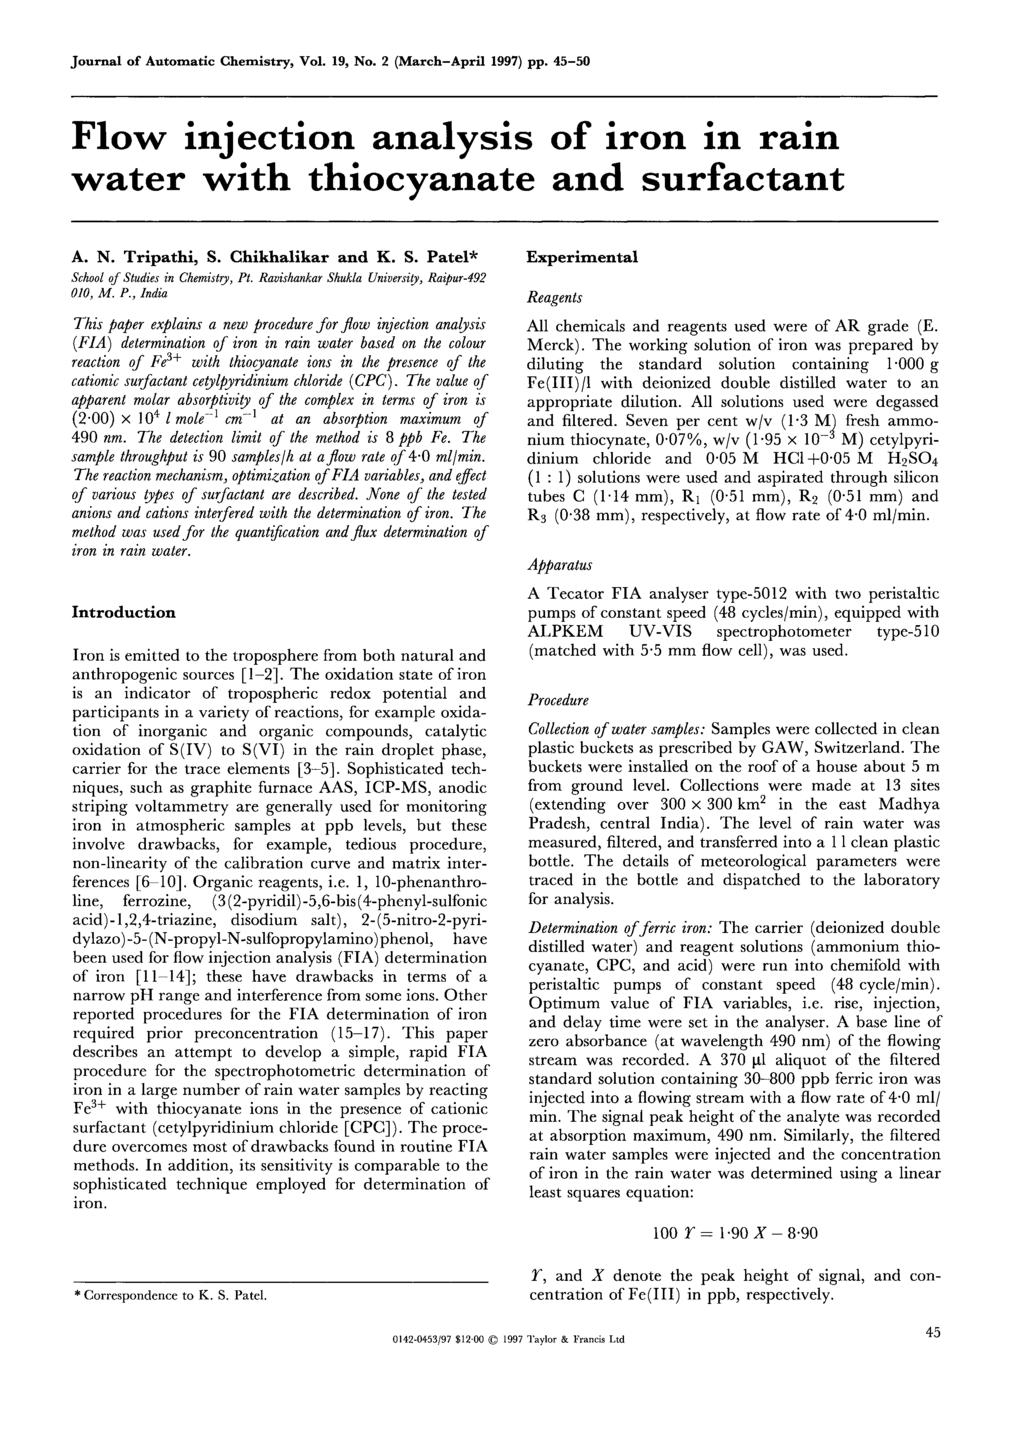 Journal of Automatic Chemistry, Vol. 19, No. 2 (March-April 1997) pp. 45-50 Flow injection analysis of iron in rain water with thiocyanate and surfactant A. N. Tripathi, S.